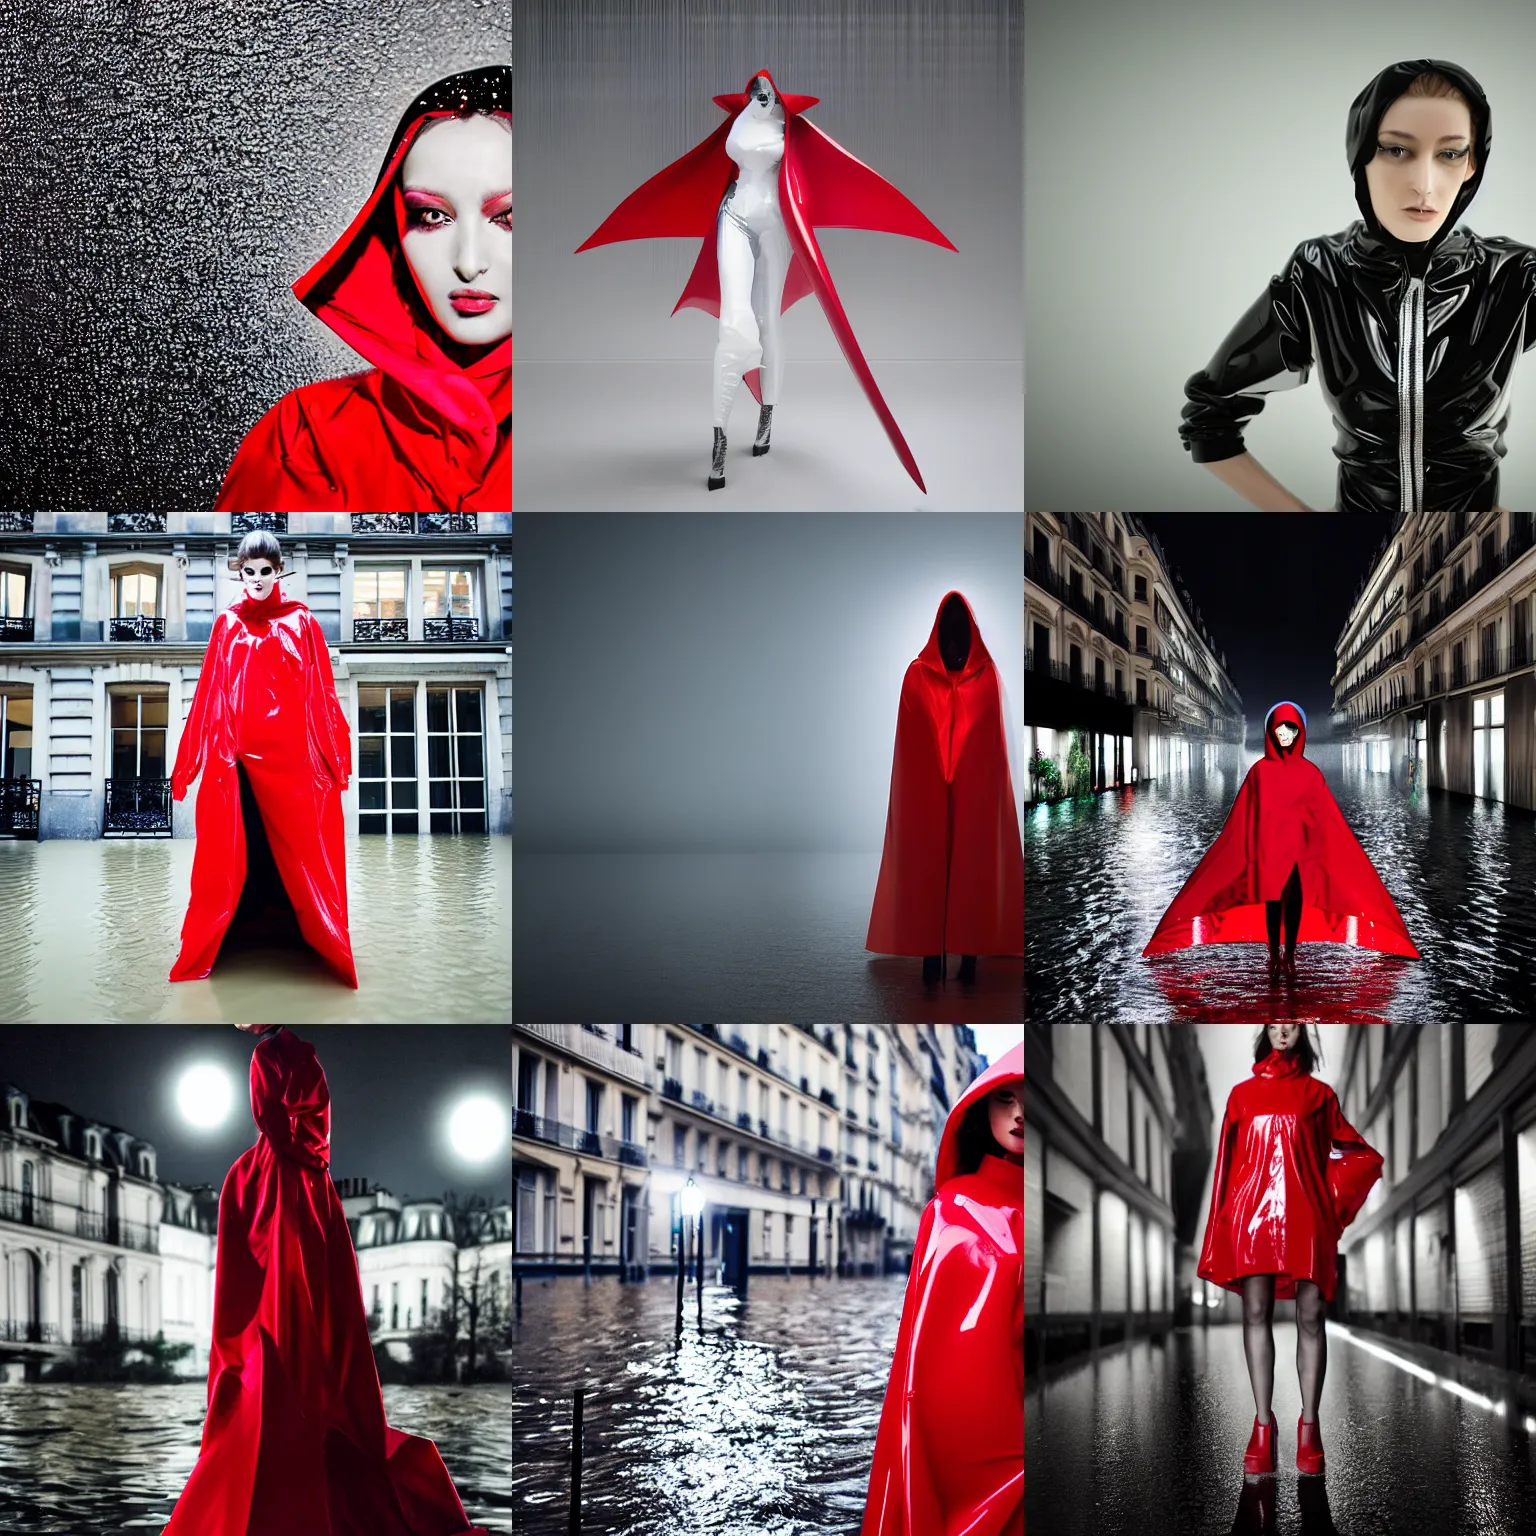 Prompt: Ultra realism, Paris fashion nighttime photoshoot of asymmetrical unusual model wearing a red wet plastic zaha hadid designed raincoat standing waist high in heavy floods by Nabbteeri, ultra realistic, mobile gimball camera, agfa film, 4K, wide shot, 35mm lens, extreme closeup focus on droplets, chiaroscuro by Nabbteeri,photorealistic, trending on instagram! (Paris street photography heavy rain background)